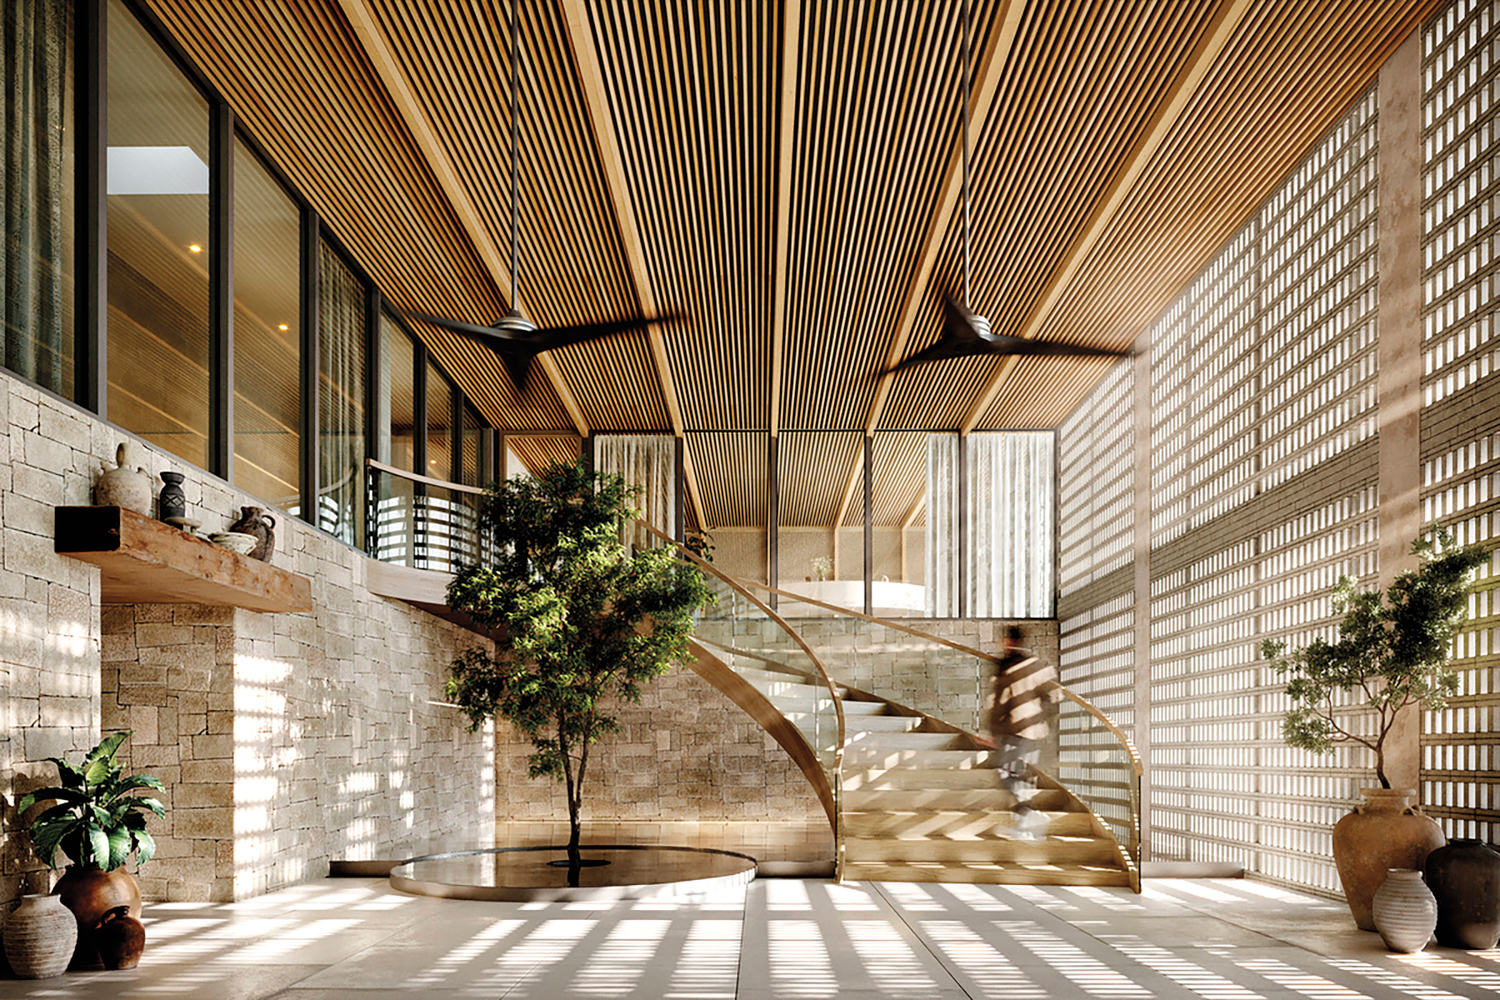 Earth-toned lobby with slated-wood ceiling, stacked stone walls and a central curved staircase